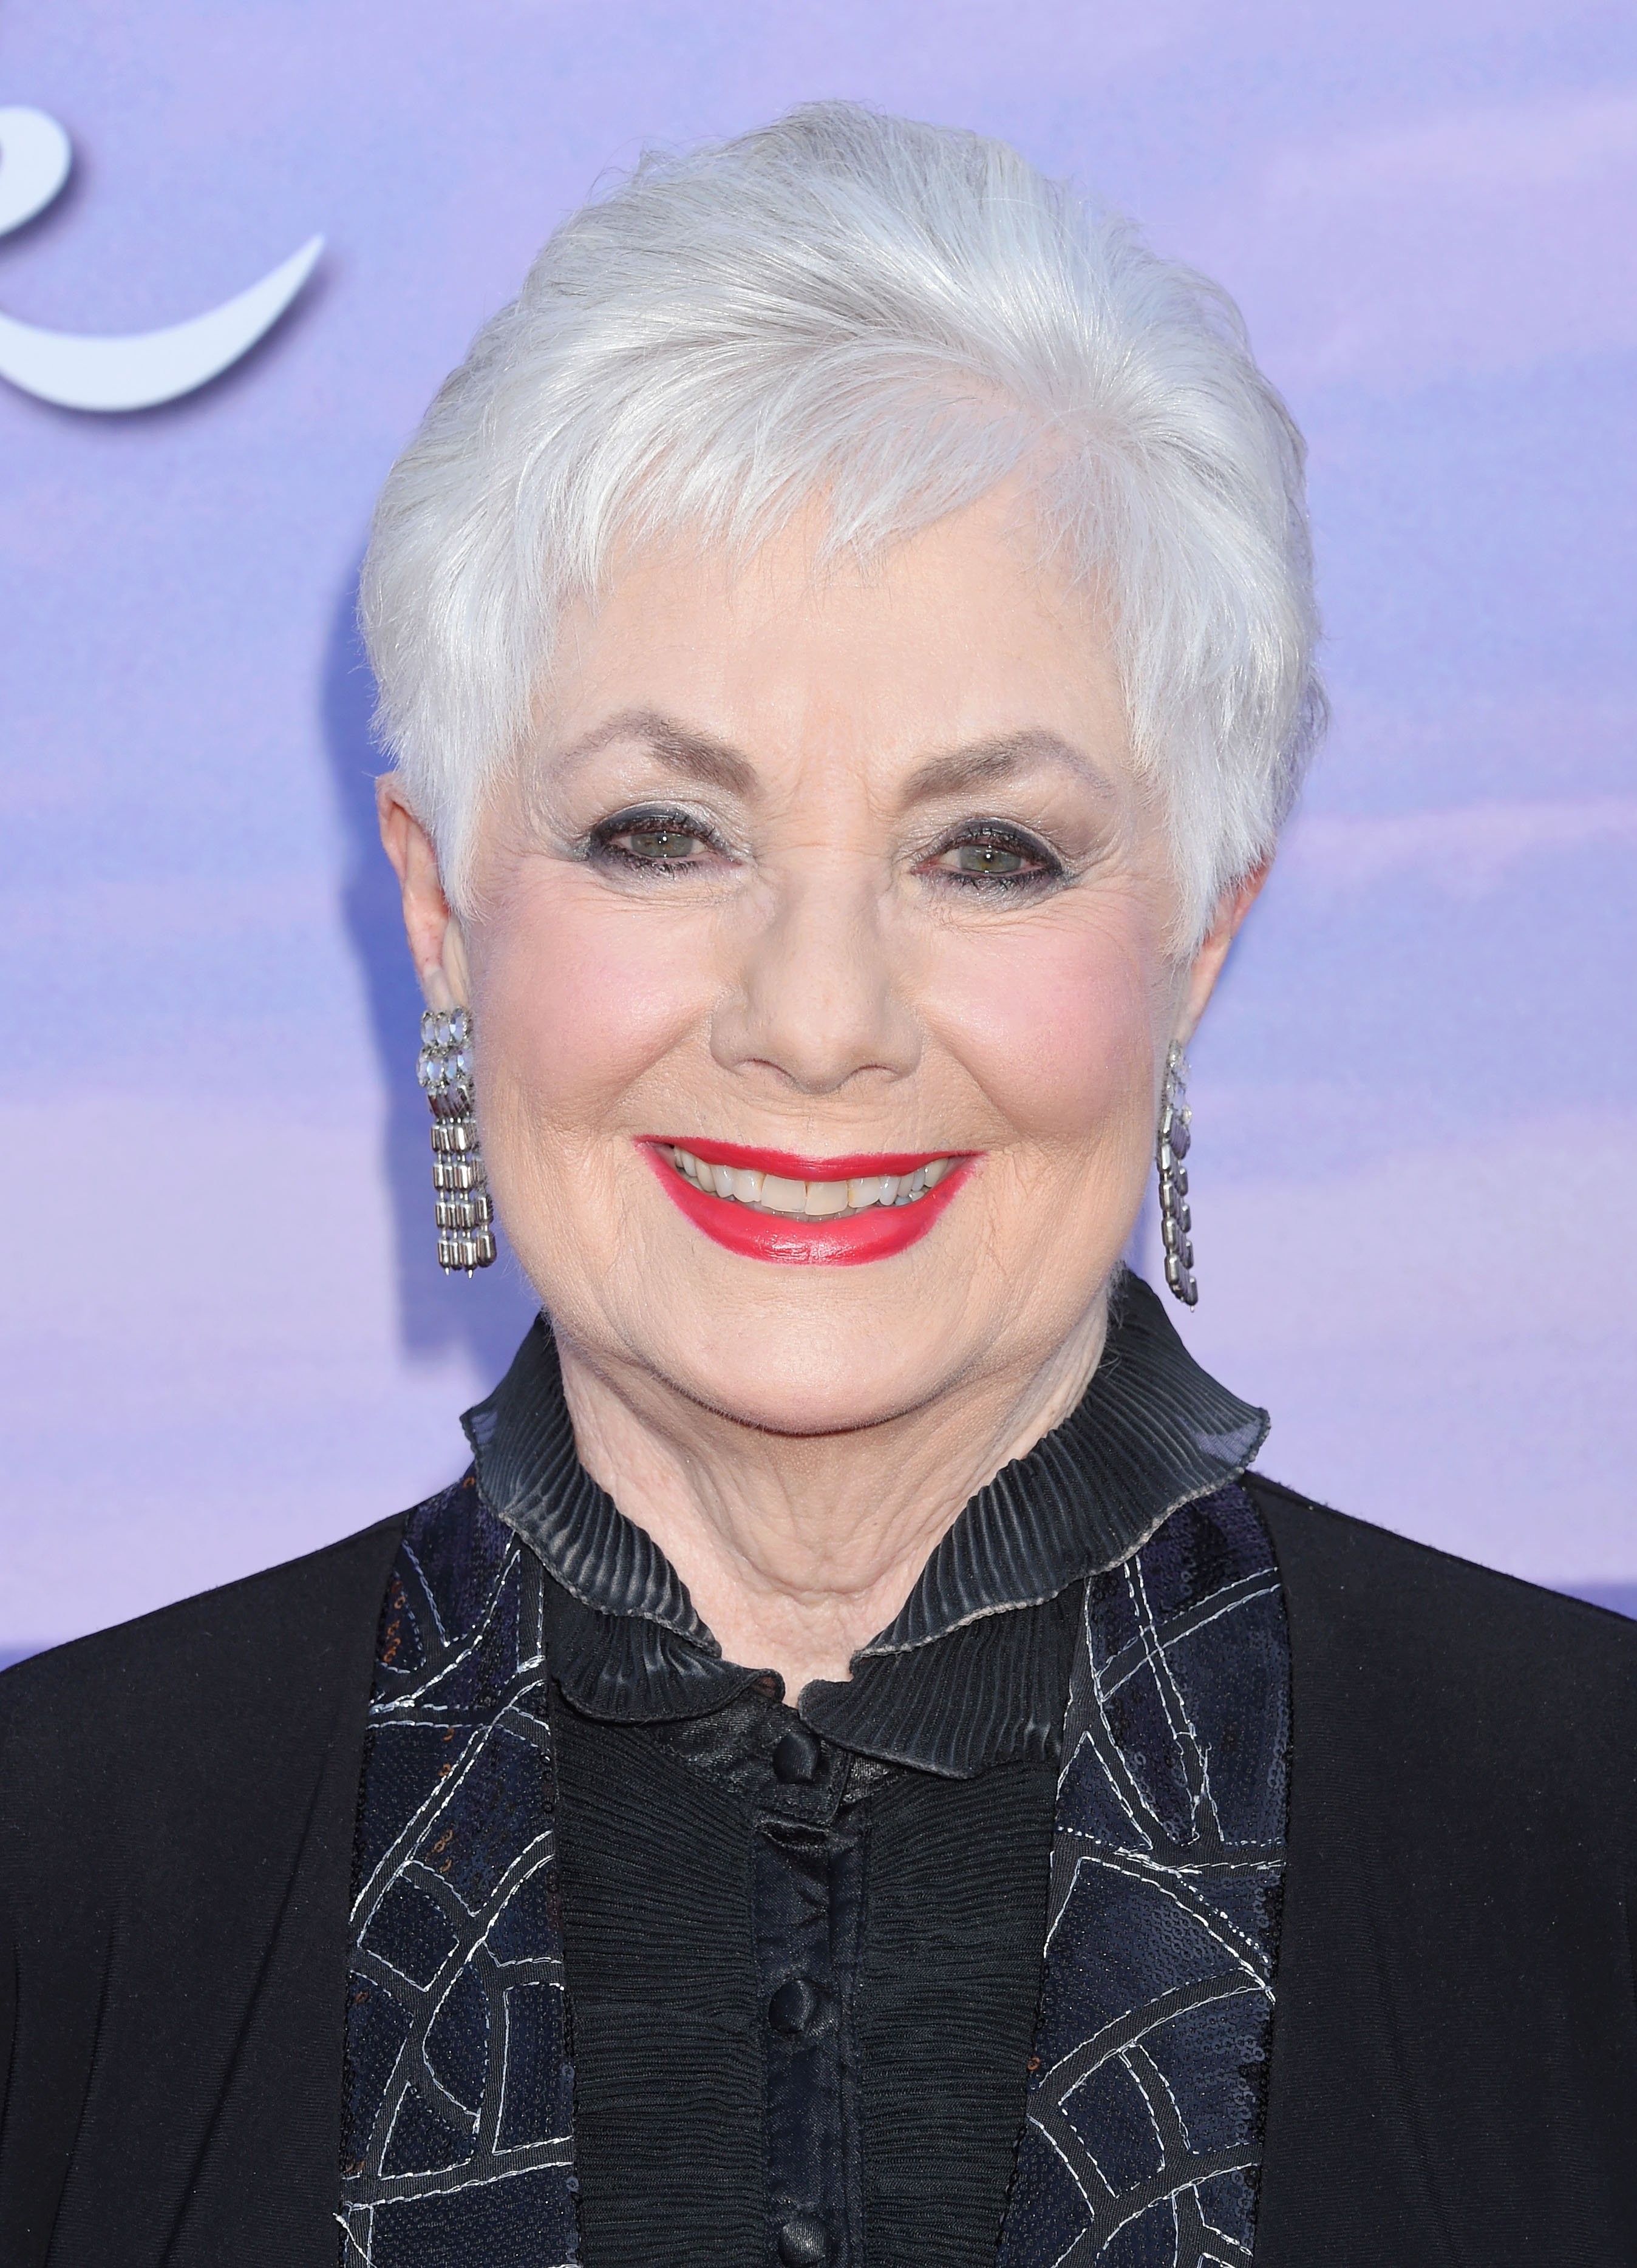 Actress Shirley Jones attends the Hallmark Channel and Hallmark Movies and Mysteries Summer 2016 TCA press tour event at a private residence on July 27, 2016 in Beverly Hills, California. | Source: Getty Images